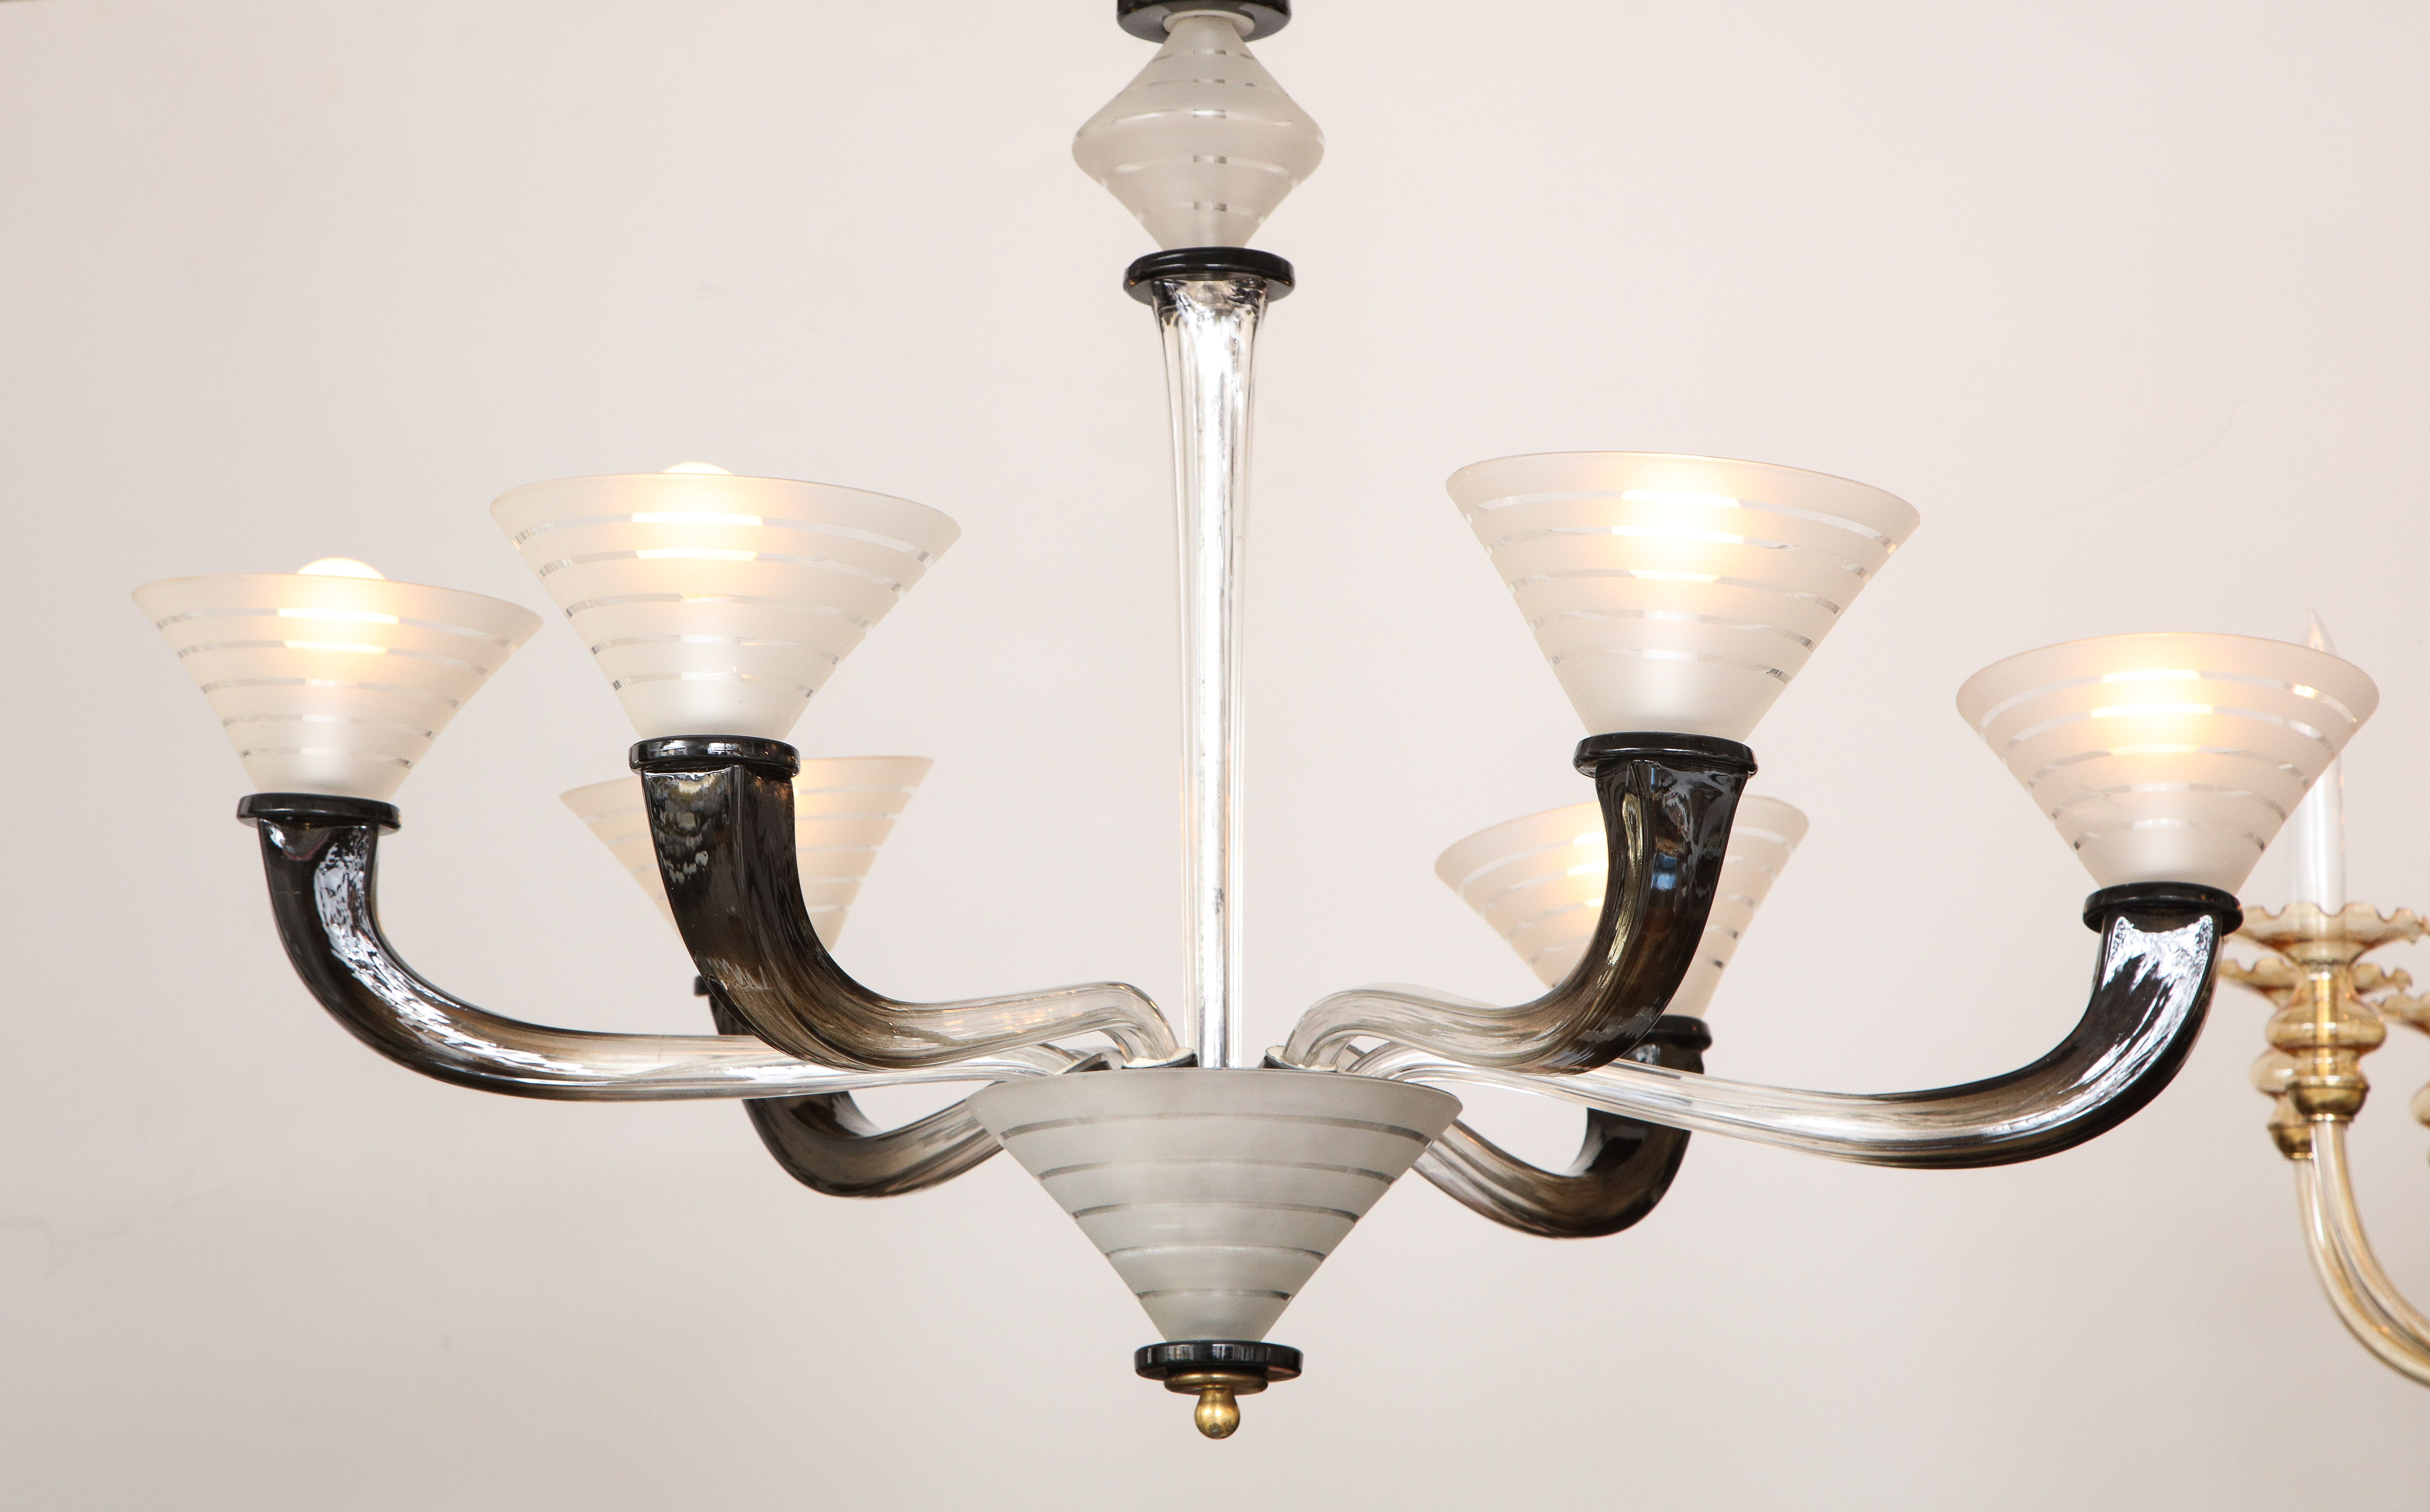 An Italian Art Deco six arm hand-blown glass Murano chandelier; the elegantly extended black glass arms surmounted by frosted glass lined bobeche, the whole supported by a central columnar stem support with the frosted glass motif echoed in the